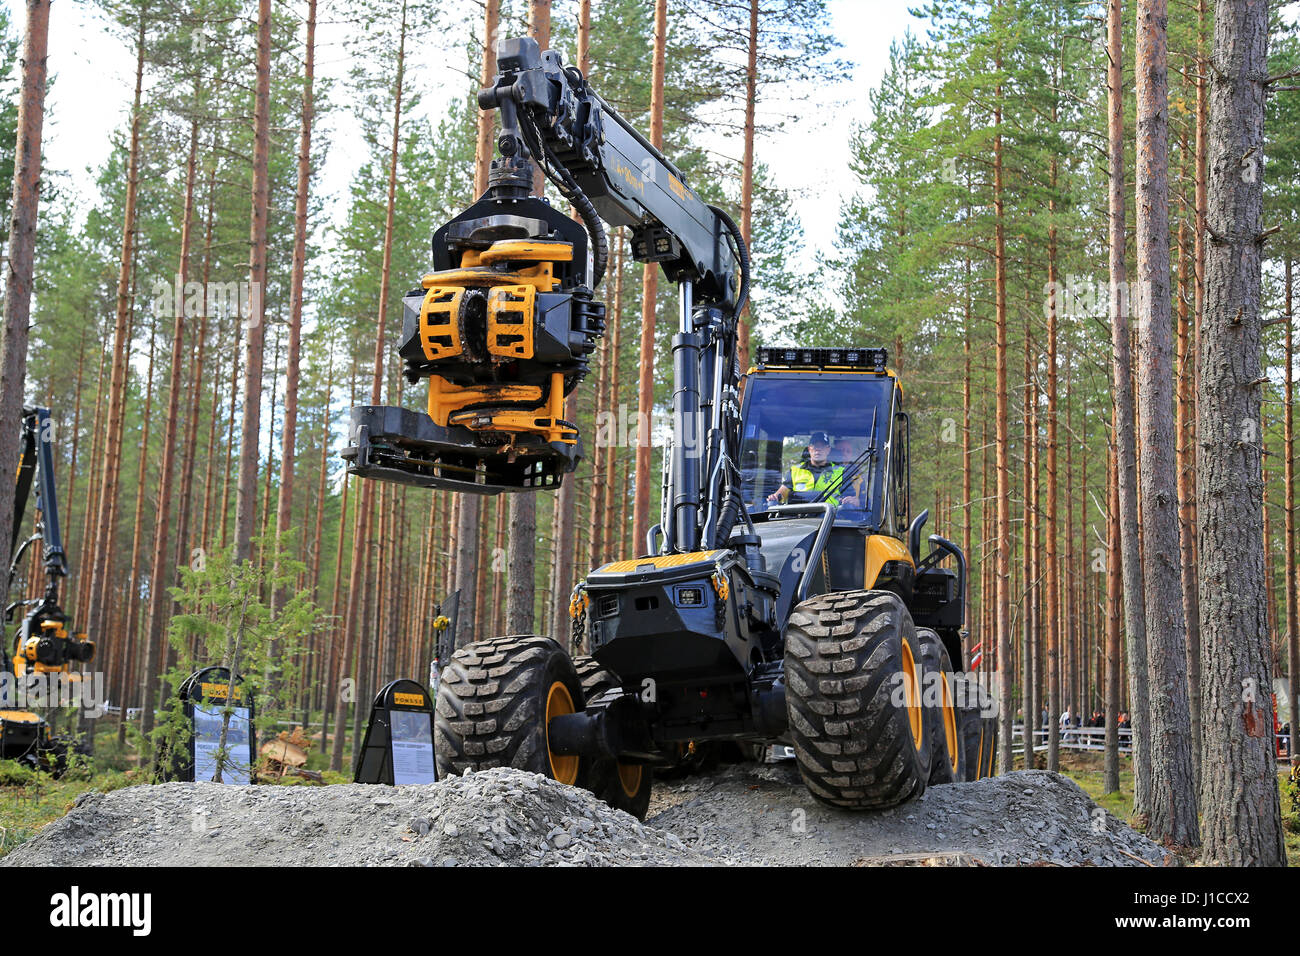 JAMSA, FINLAND - SEPTEMBER 1, 2016: Ponsse forest harvester Ergo and harvester head presented during a ride over rough terrain, a work demonstration b Stock Photo